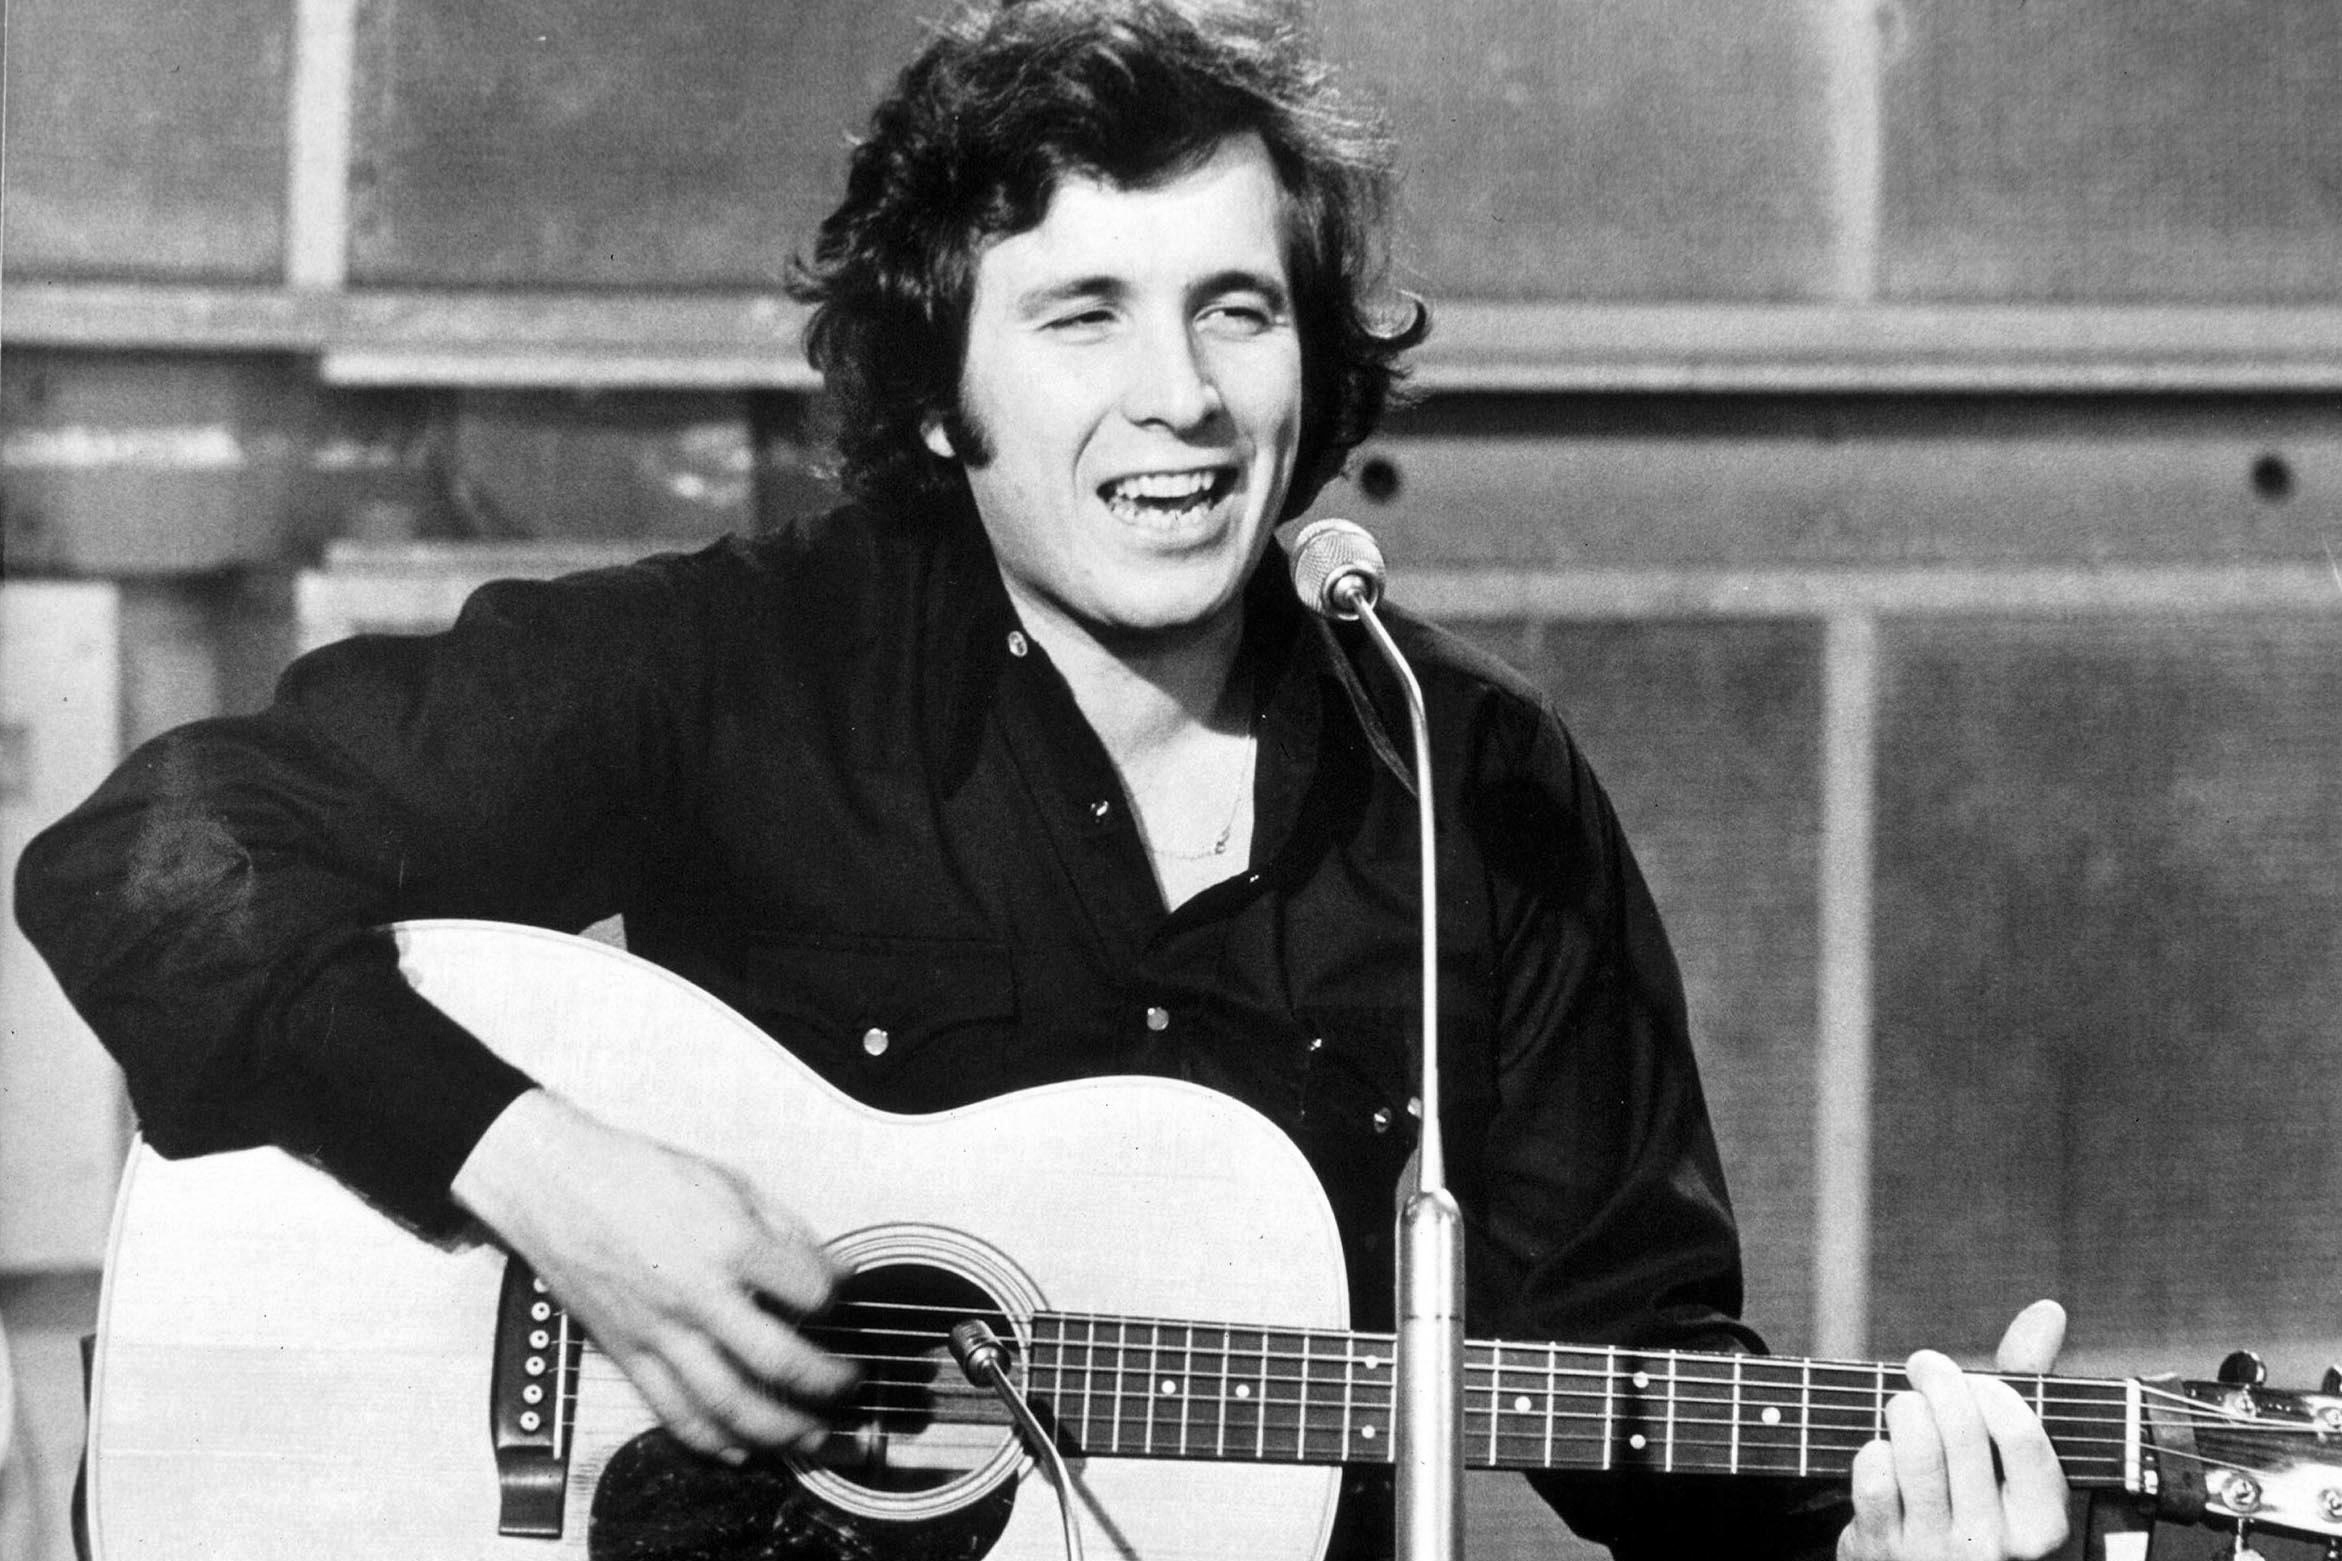 ‘Why I’ve sliced off my daughter’s $3m inheritance’: First, American Pie singer Don McLean admitted domestic abuse to avoid jail. Then his daughter waded into the row. Now read his astonishing response…